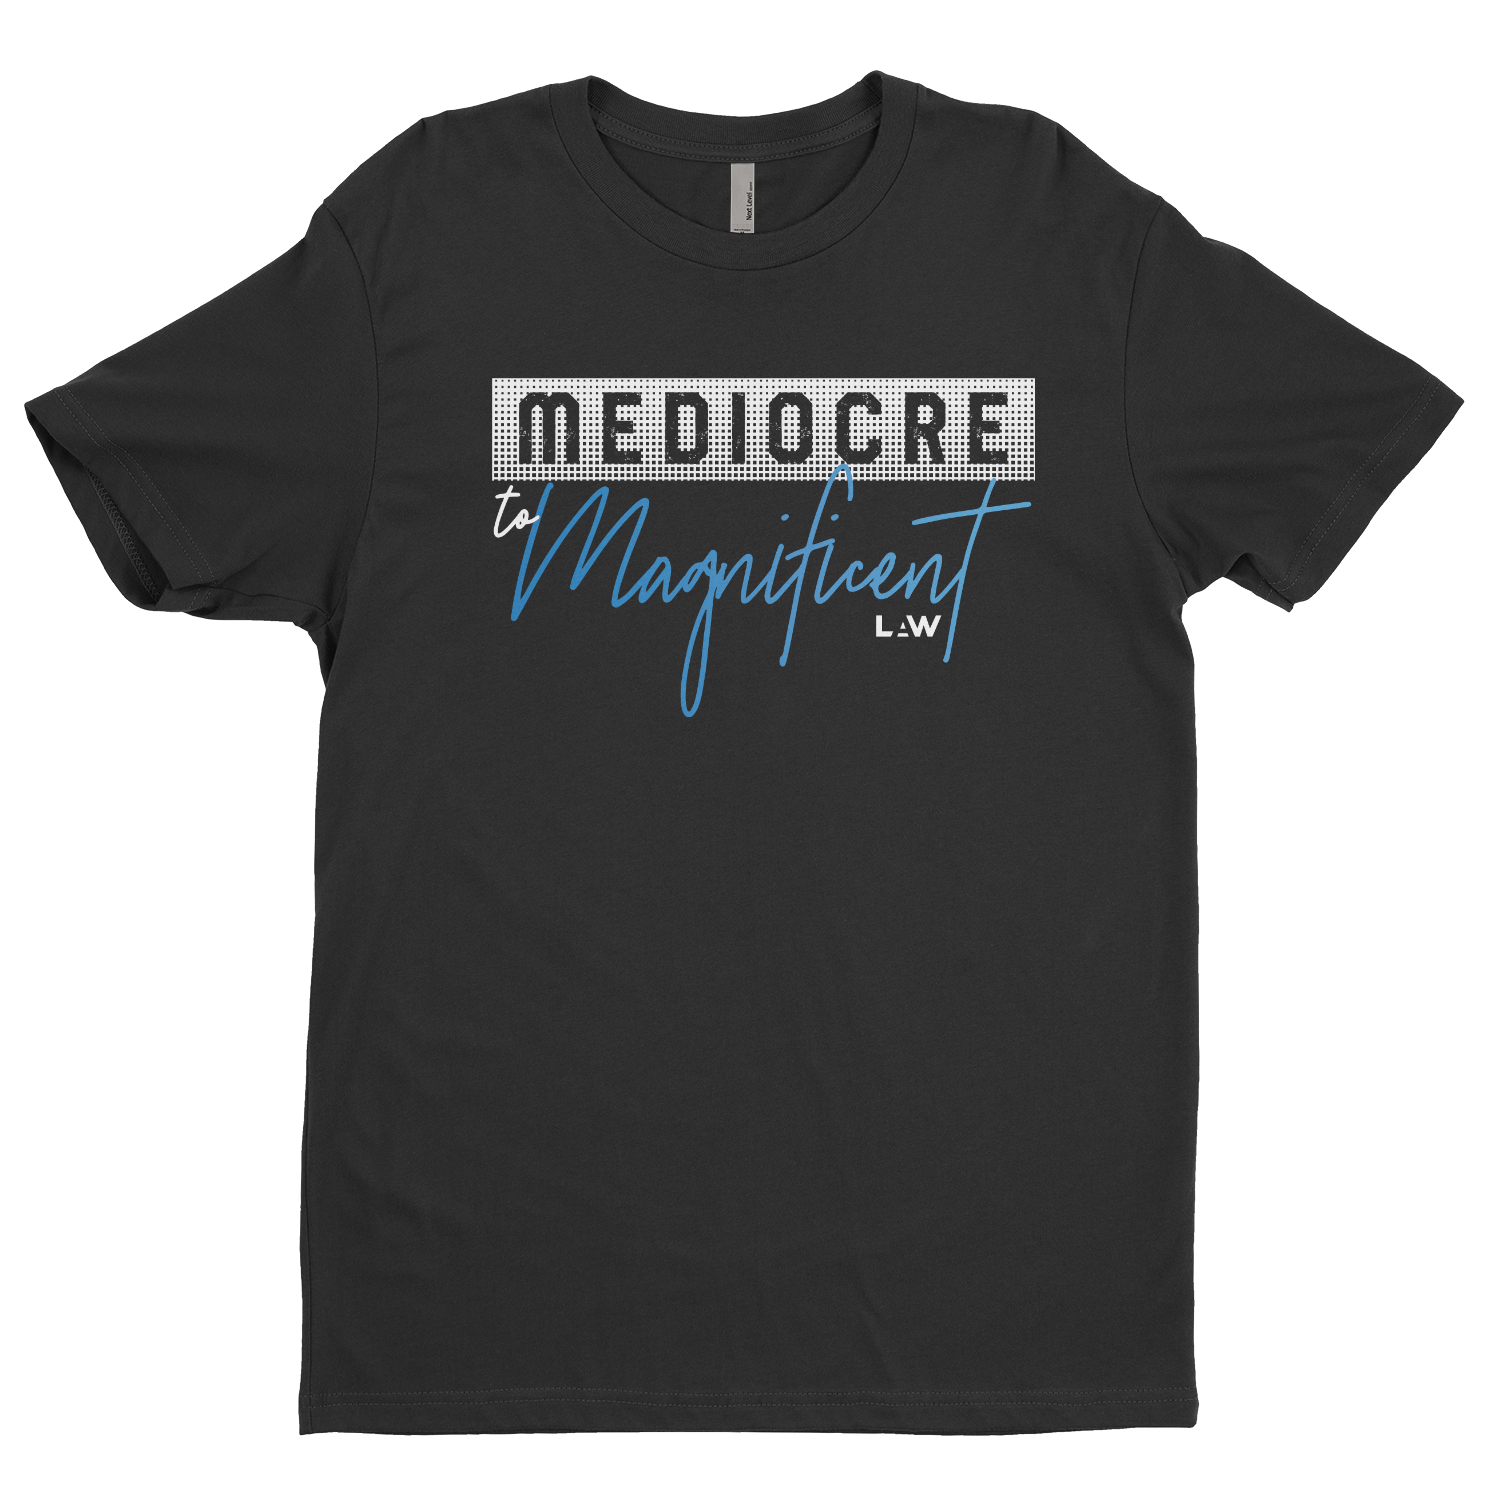 Mediocre to Magnificent Tee